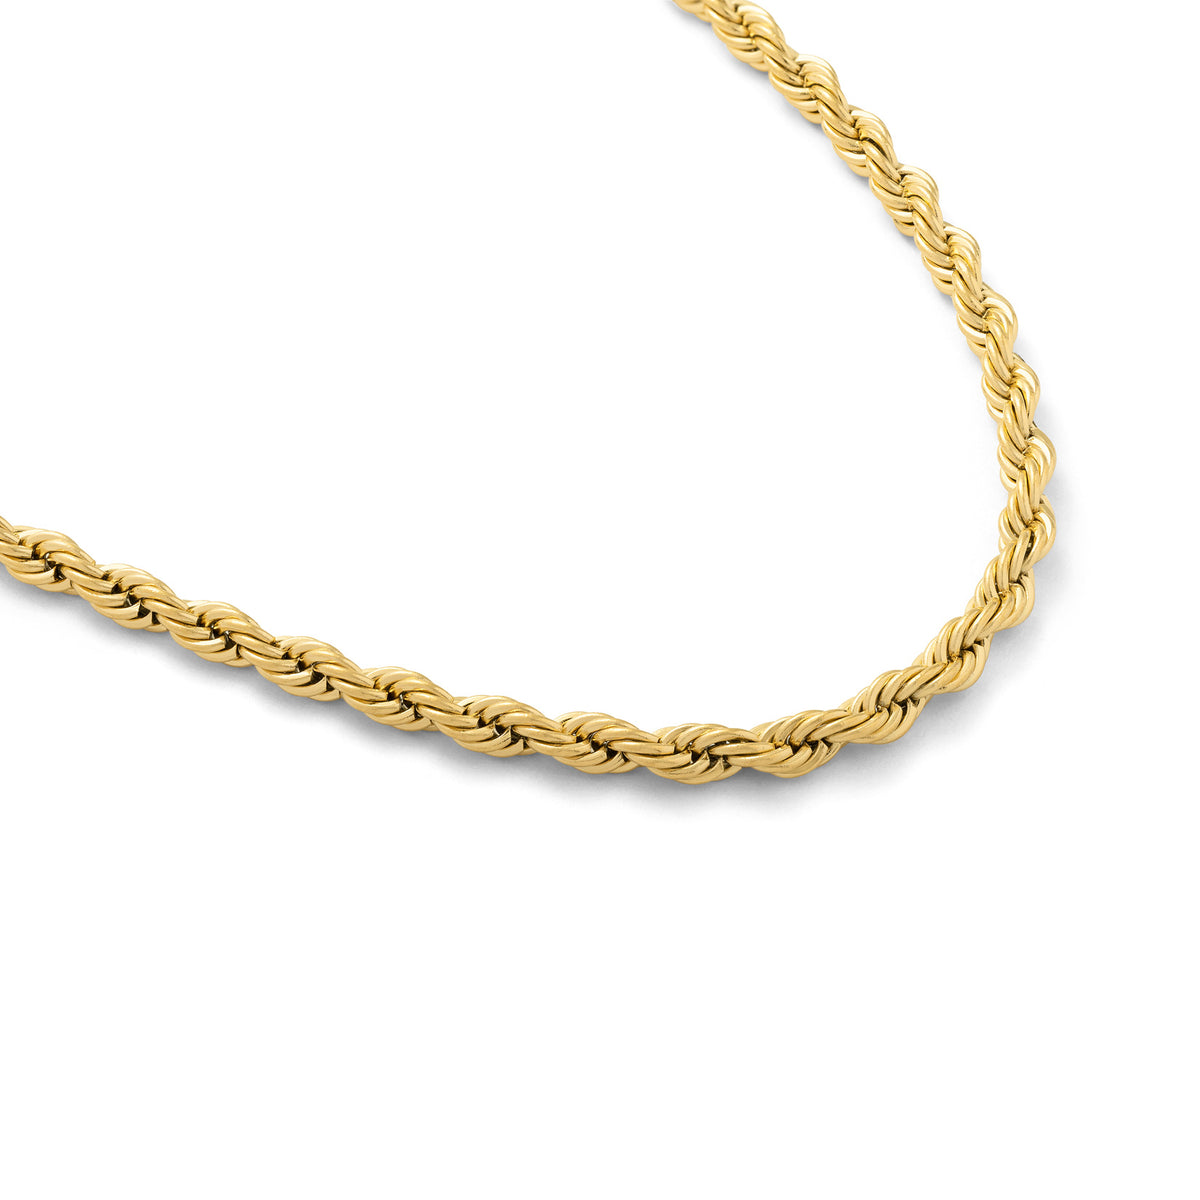 Rope Necklace - 4mm, Size 16, 14K White Chain - The GLD Shop